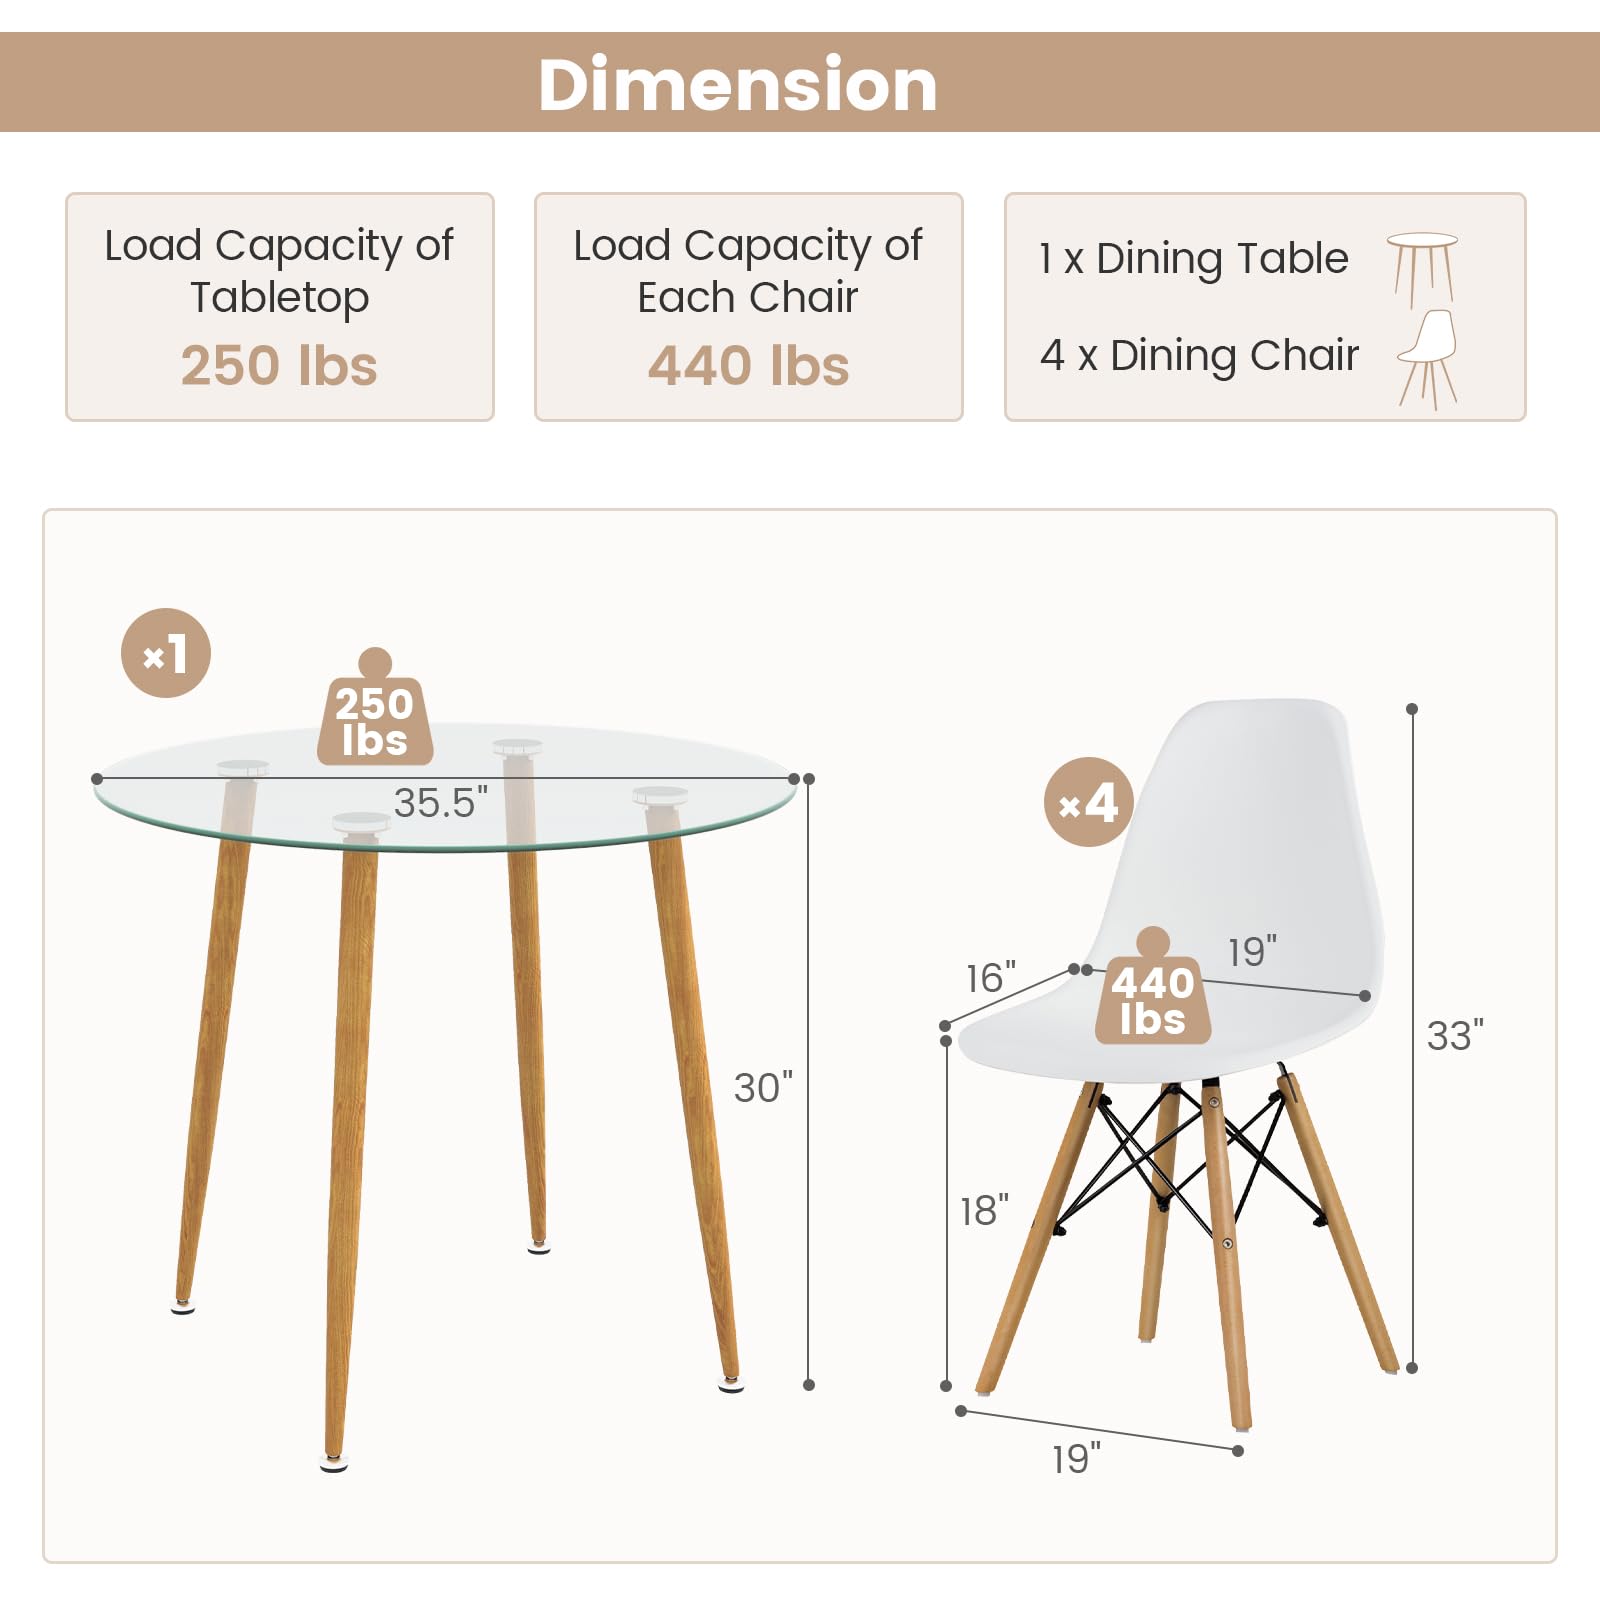 Tangkula 5-Piece Dining Table Set for 4